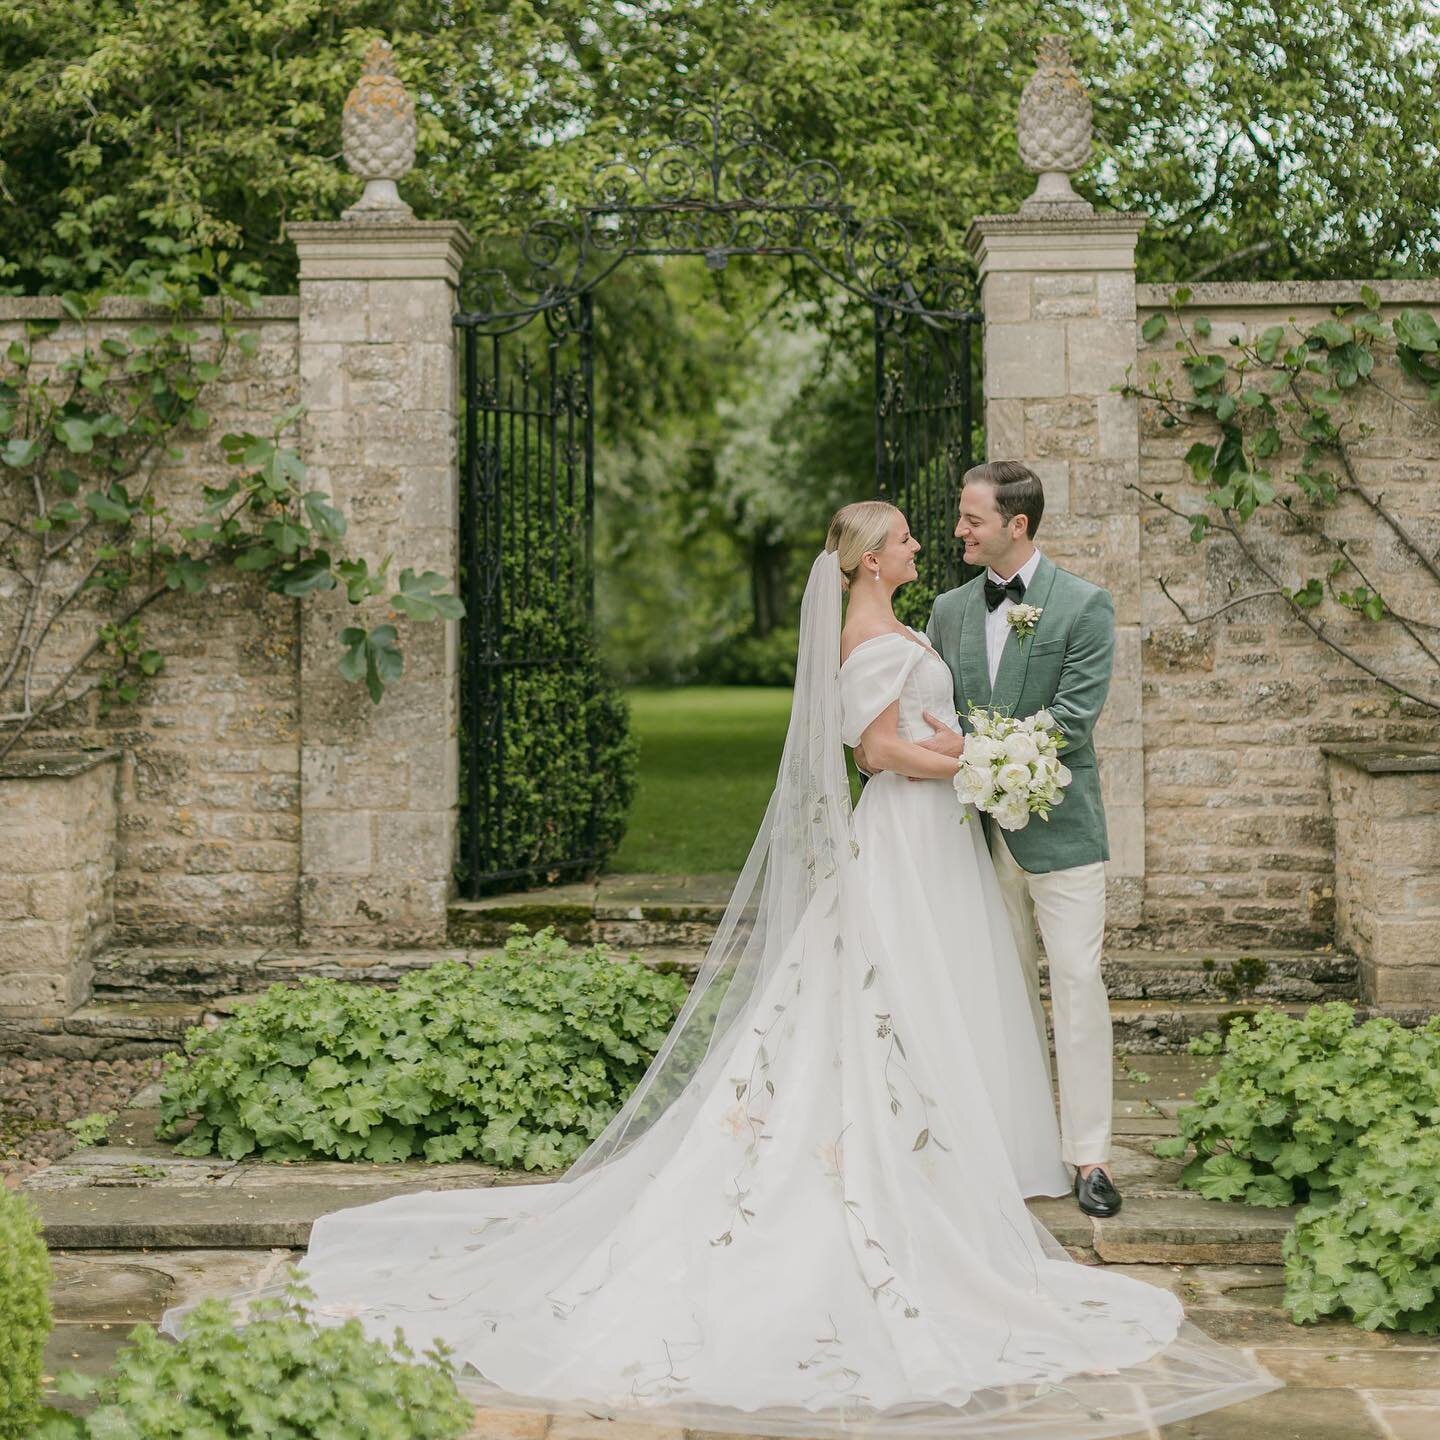 E M M Y &amp;  M I L A M 

Very excited to be catching up with this gorgeous couple today. Their wedding was one of the happiest and it was such an honour to be part of it! 🤍

Photography: @chloewinstanleyphotography 

#cornwellmanor #ukdesitnationw